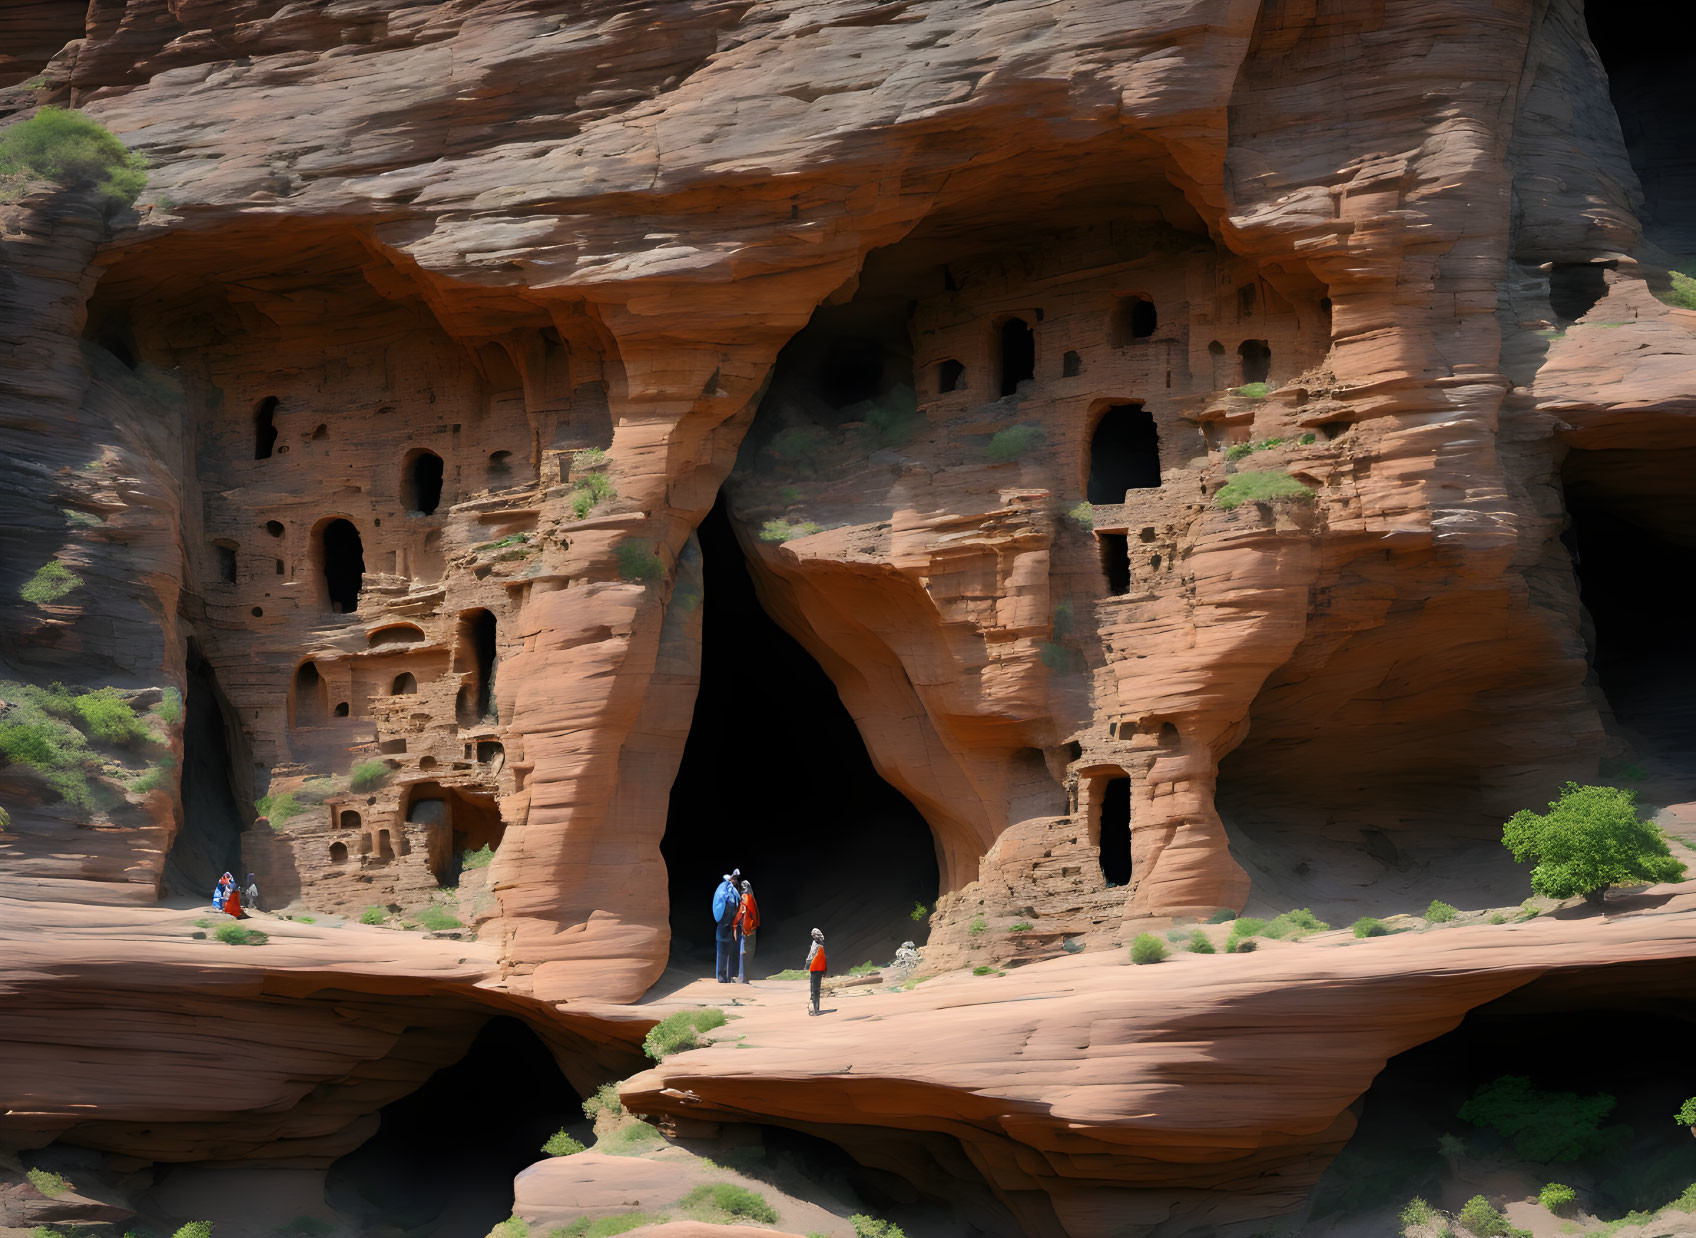 Ancient Cliff Dwellings Explored by Hikers on Red Sandstone Formation